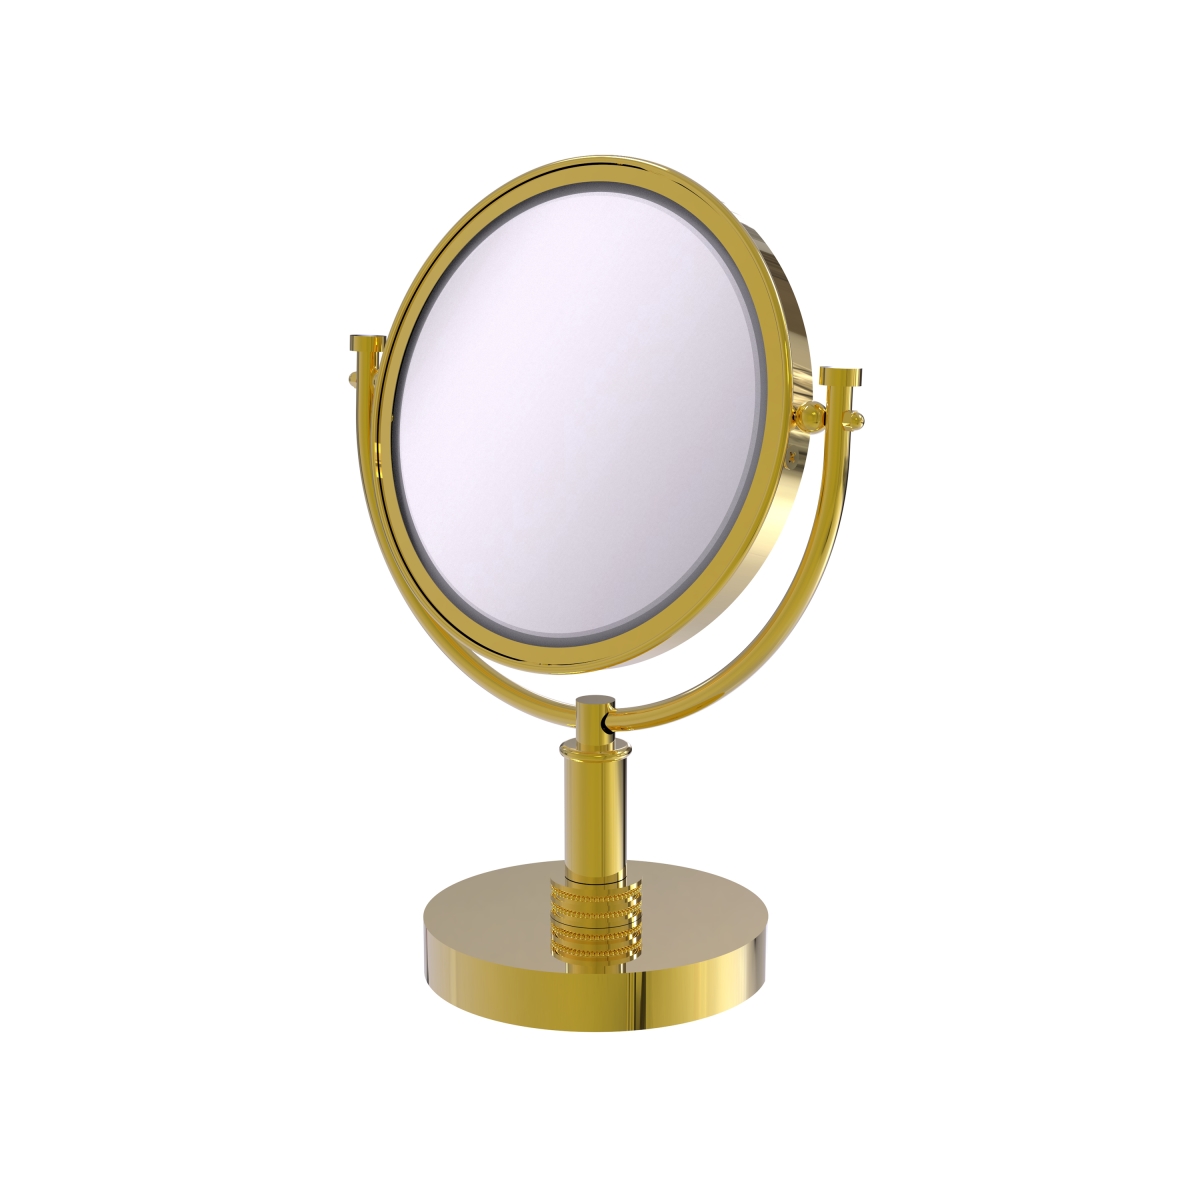 Dm-4d-5x-unl Dotted Ring Style 8 In. Vanity Top Make-up Mirror 5x Magnification, Unlacquered Brass